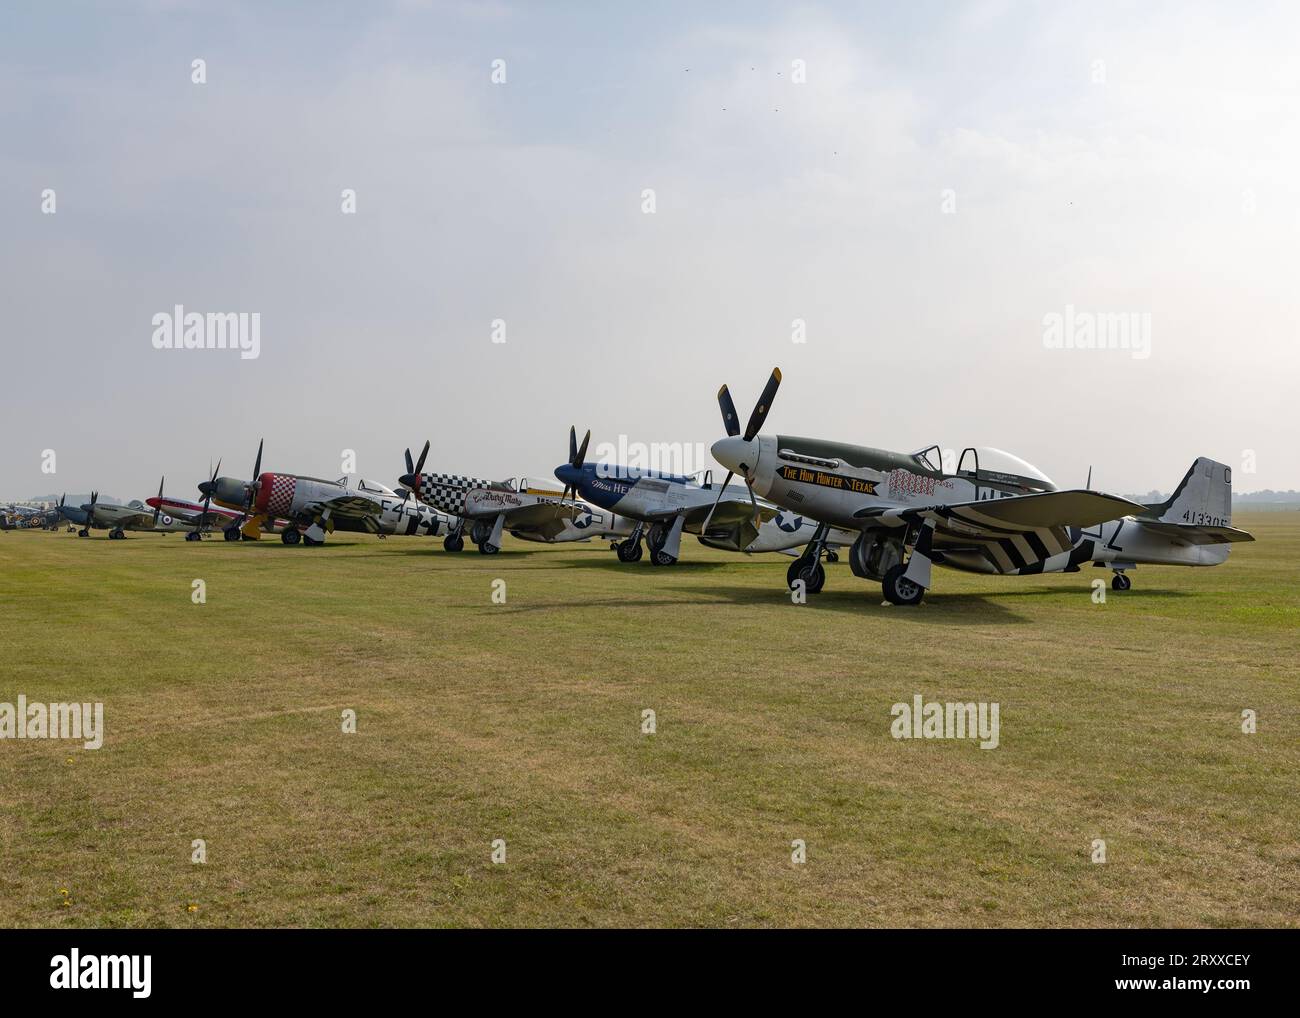 Three P-51D Mustang fighters at the 2023 Battle of Britain Air Show at the IWM Duxford Stock Photo